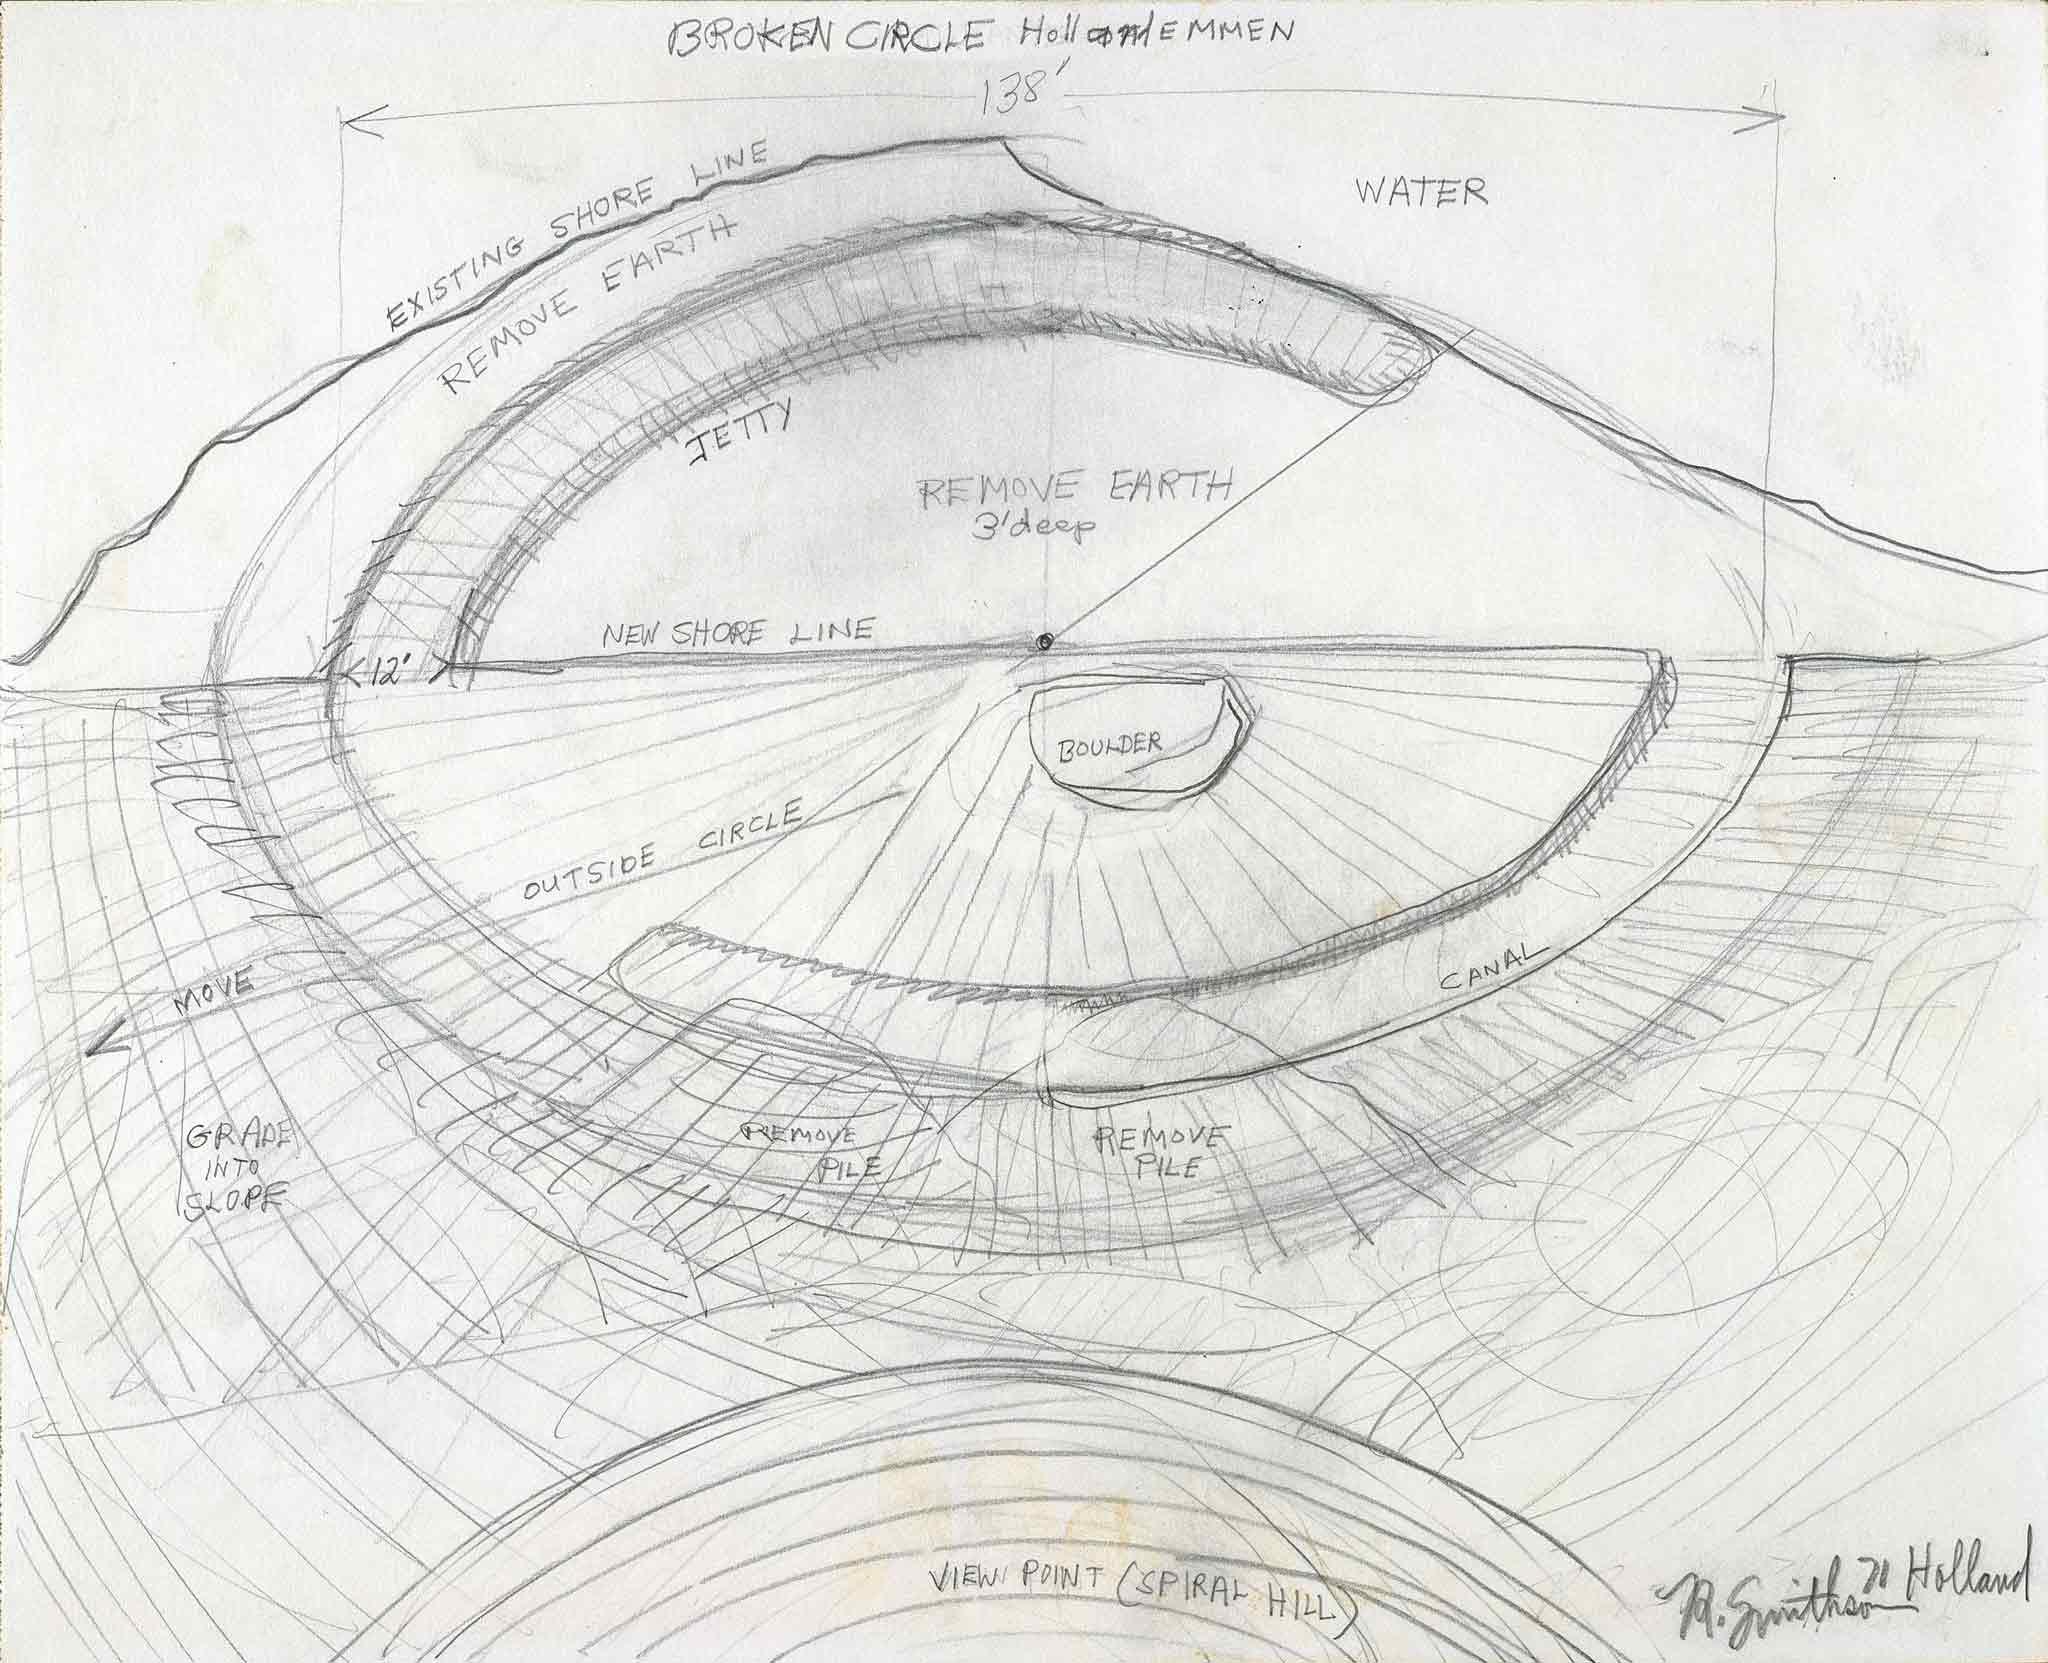 A drawing by Robert Smithson of his earthwork, Broken Circle in Emmen, the Netherlands